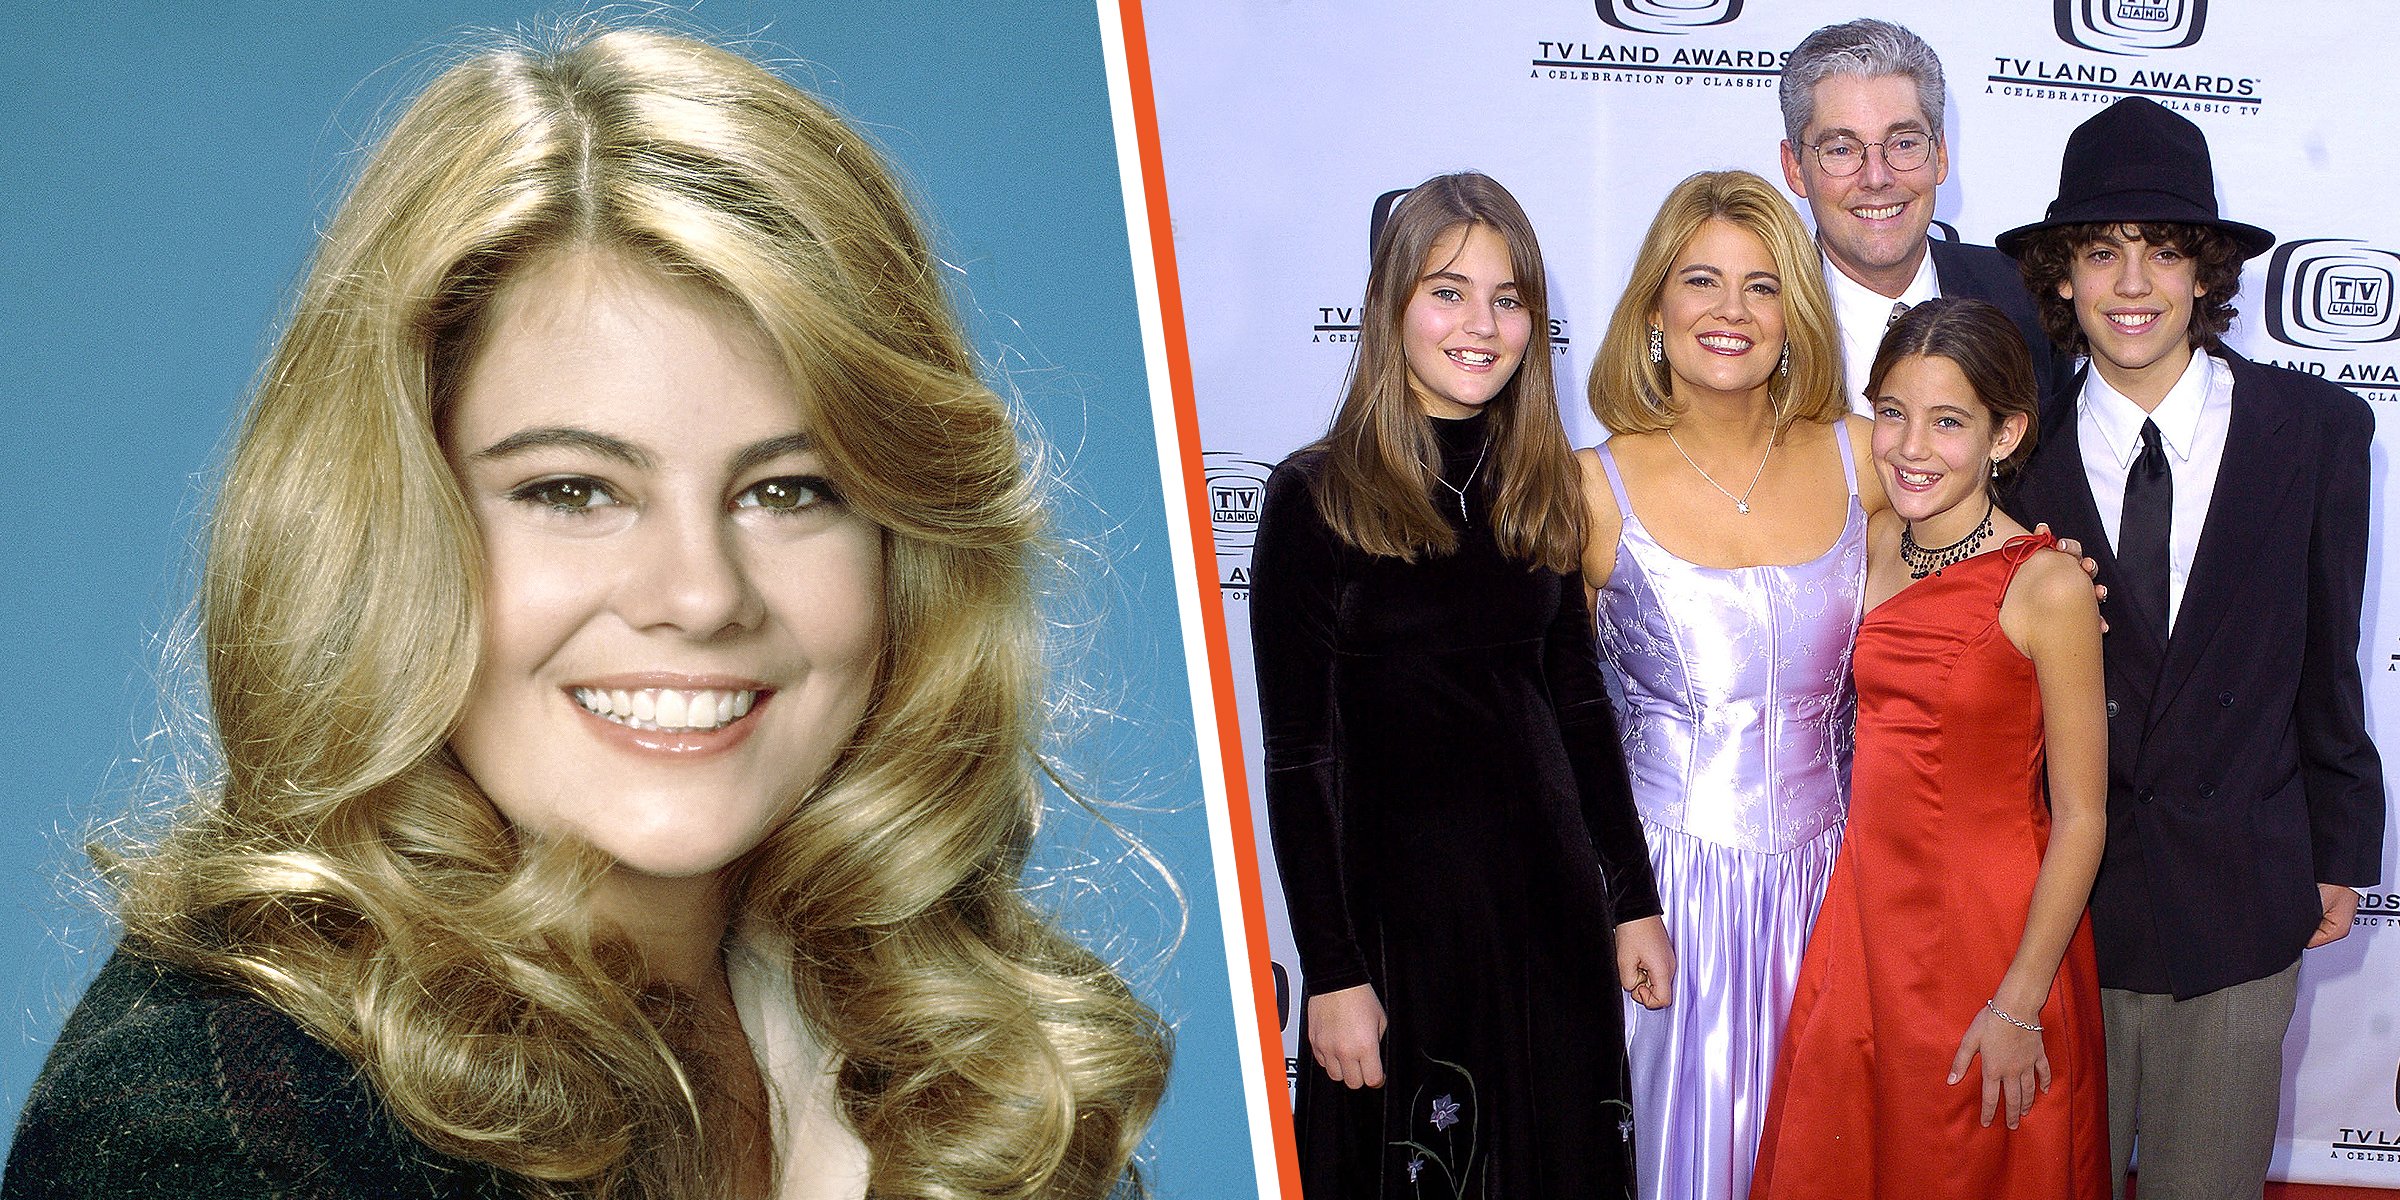 Lisa Whelchel | Lisa Whelchel, Steven Cauble, and their kids | Source: Getty Images